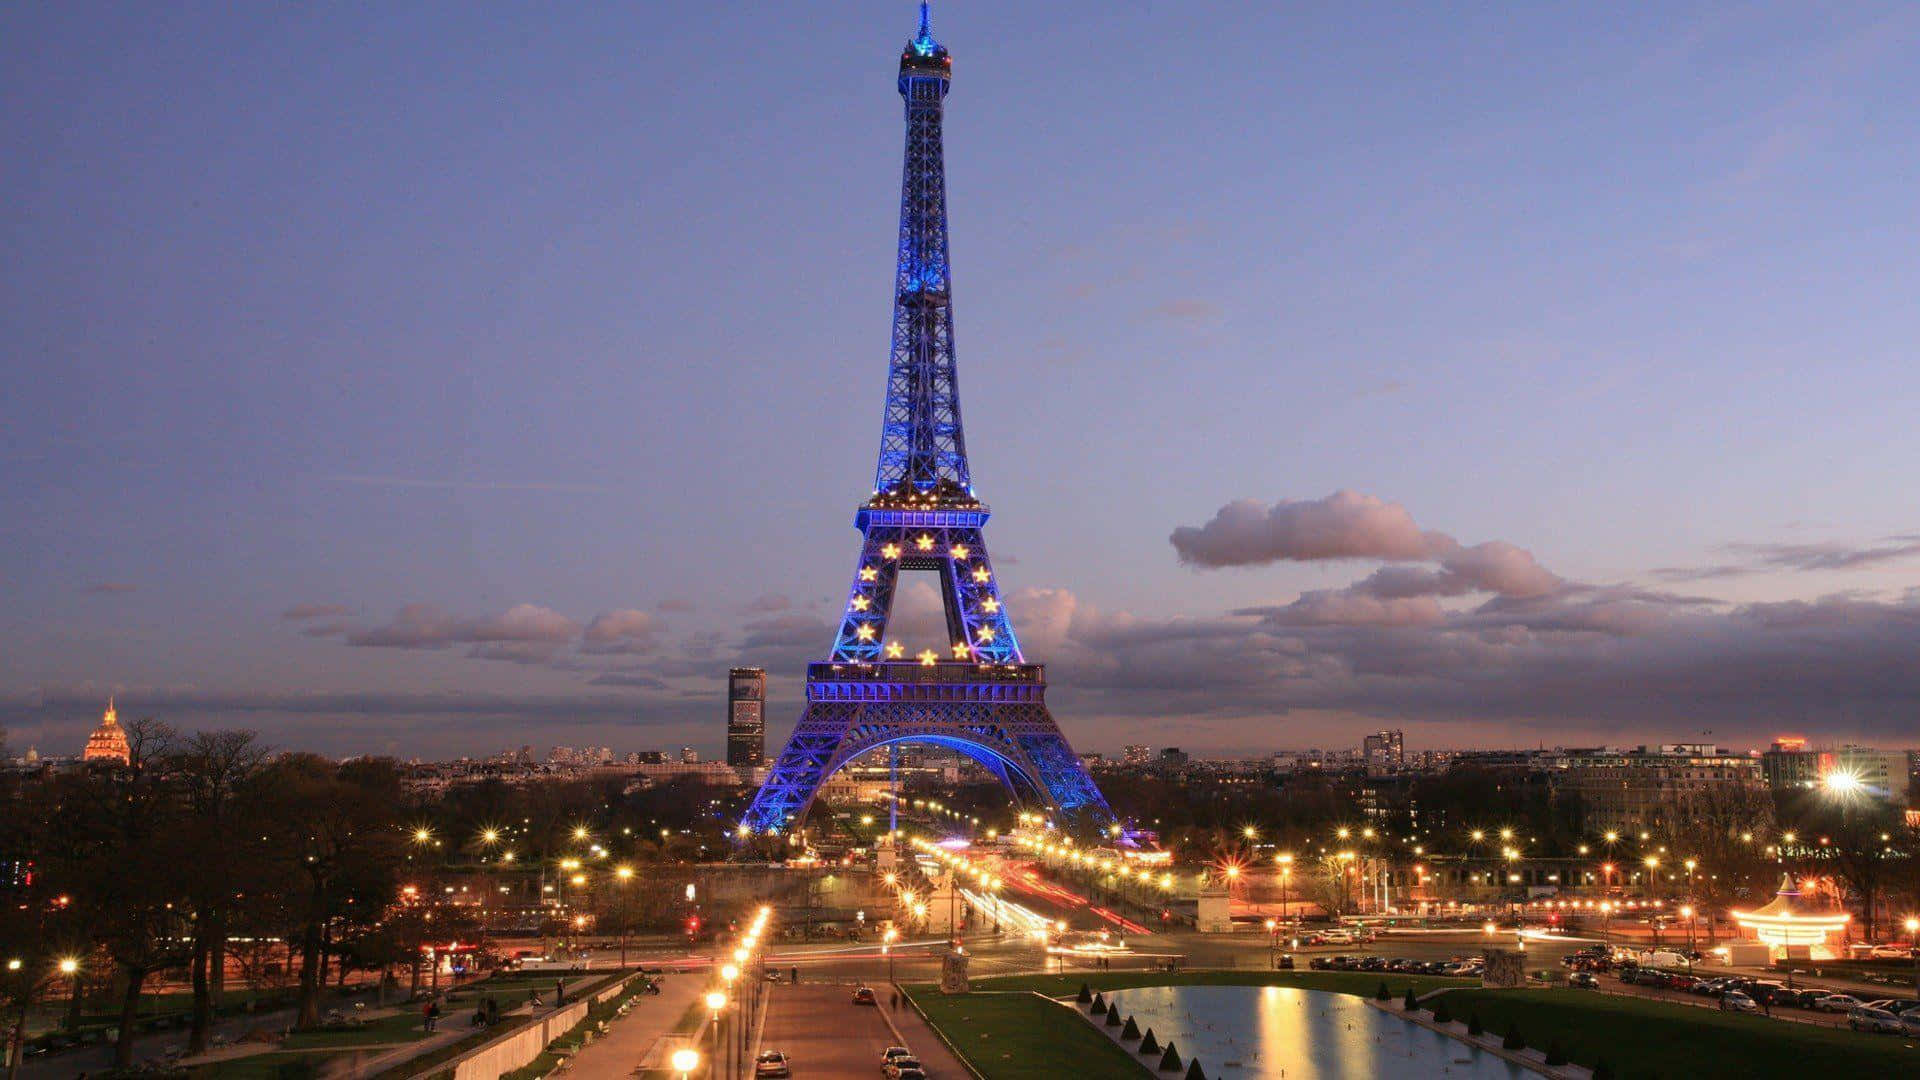 The beautiful Eiffel Tower shines from afar, in the city of lights.